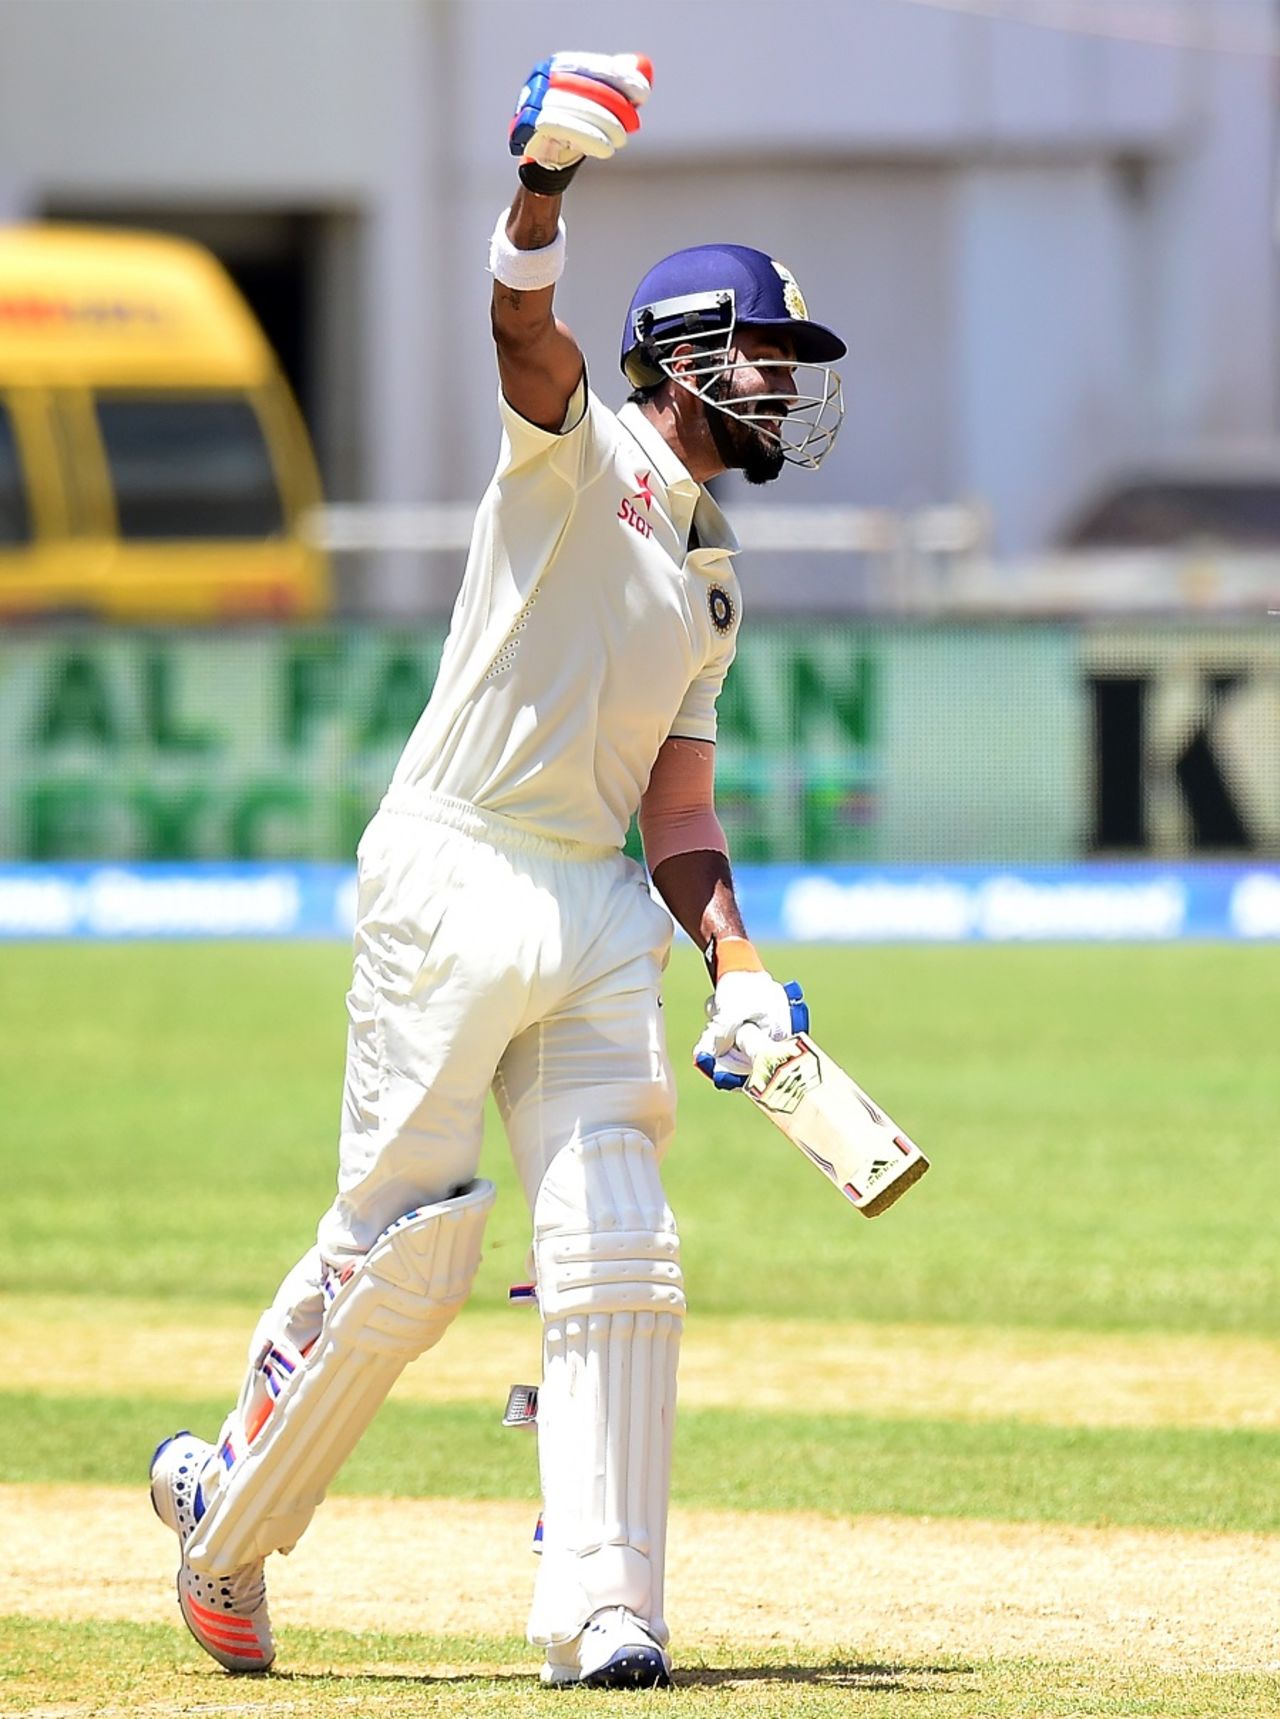 KL Rahul is thrilled after getting to his ton with a six, West Indies v India, 2nd Test, Kingston, 2nd day, July 31, 2016